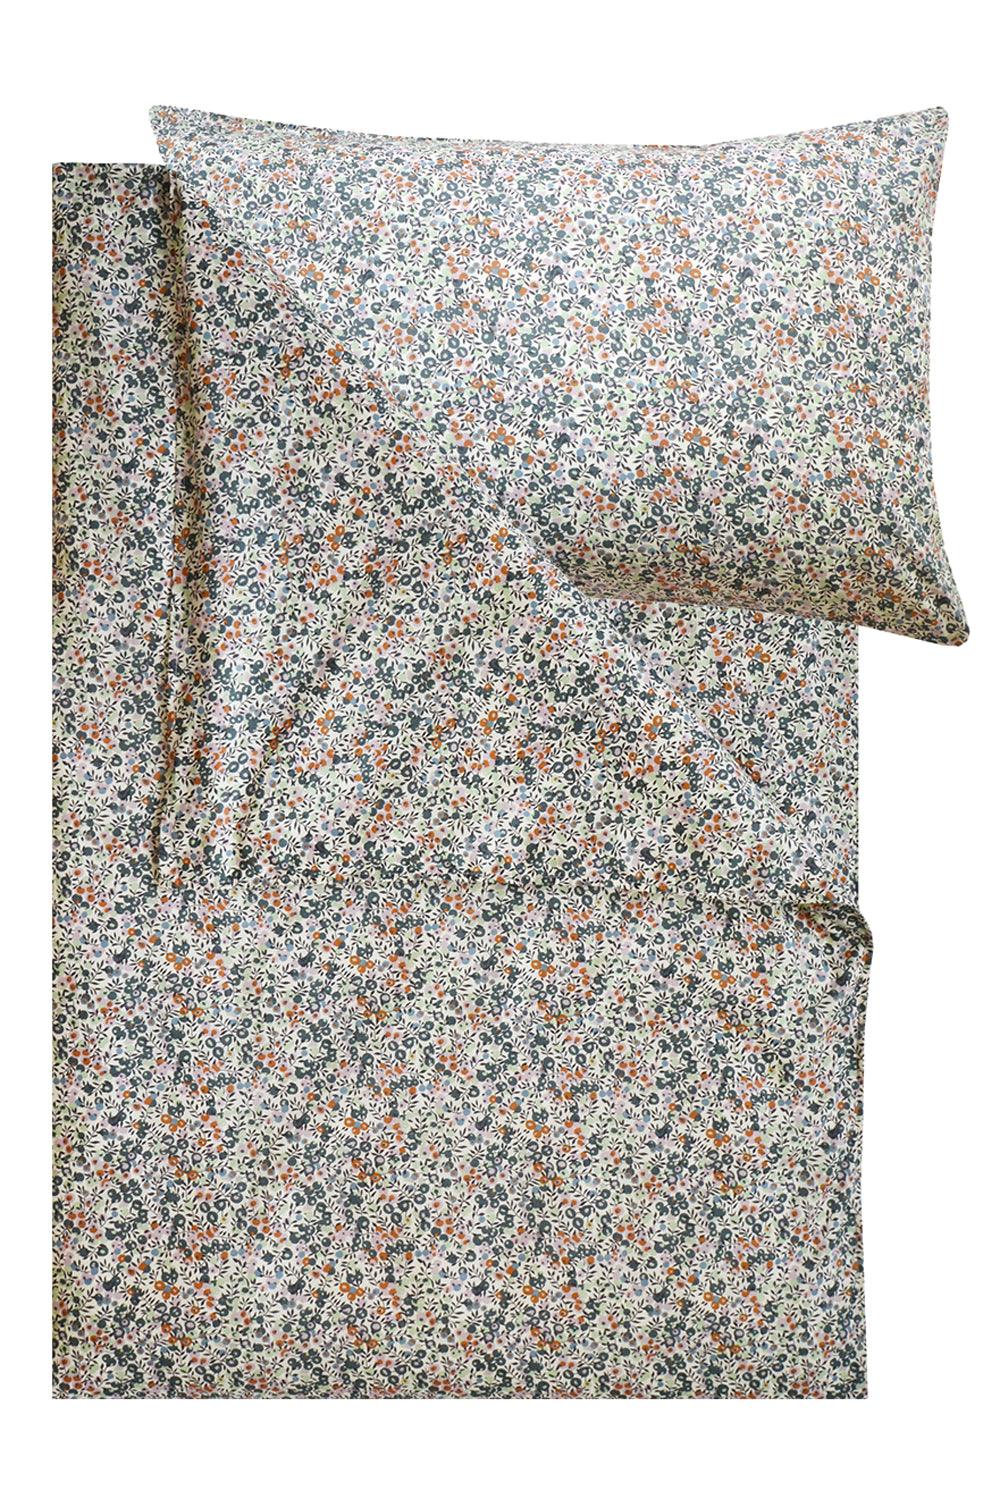 Bedding made with Organic Liberty Fabric WILTSHIRE - Coco & Wolf